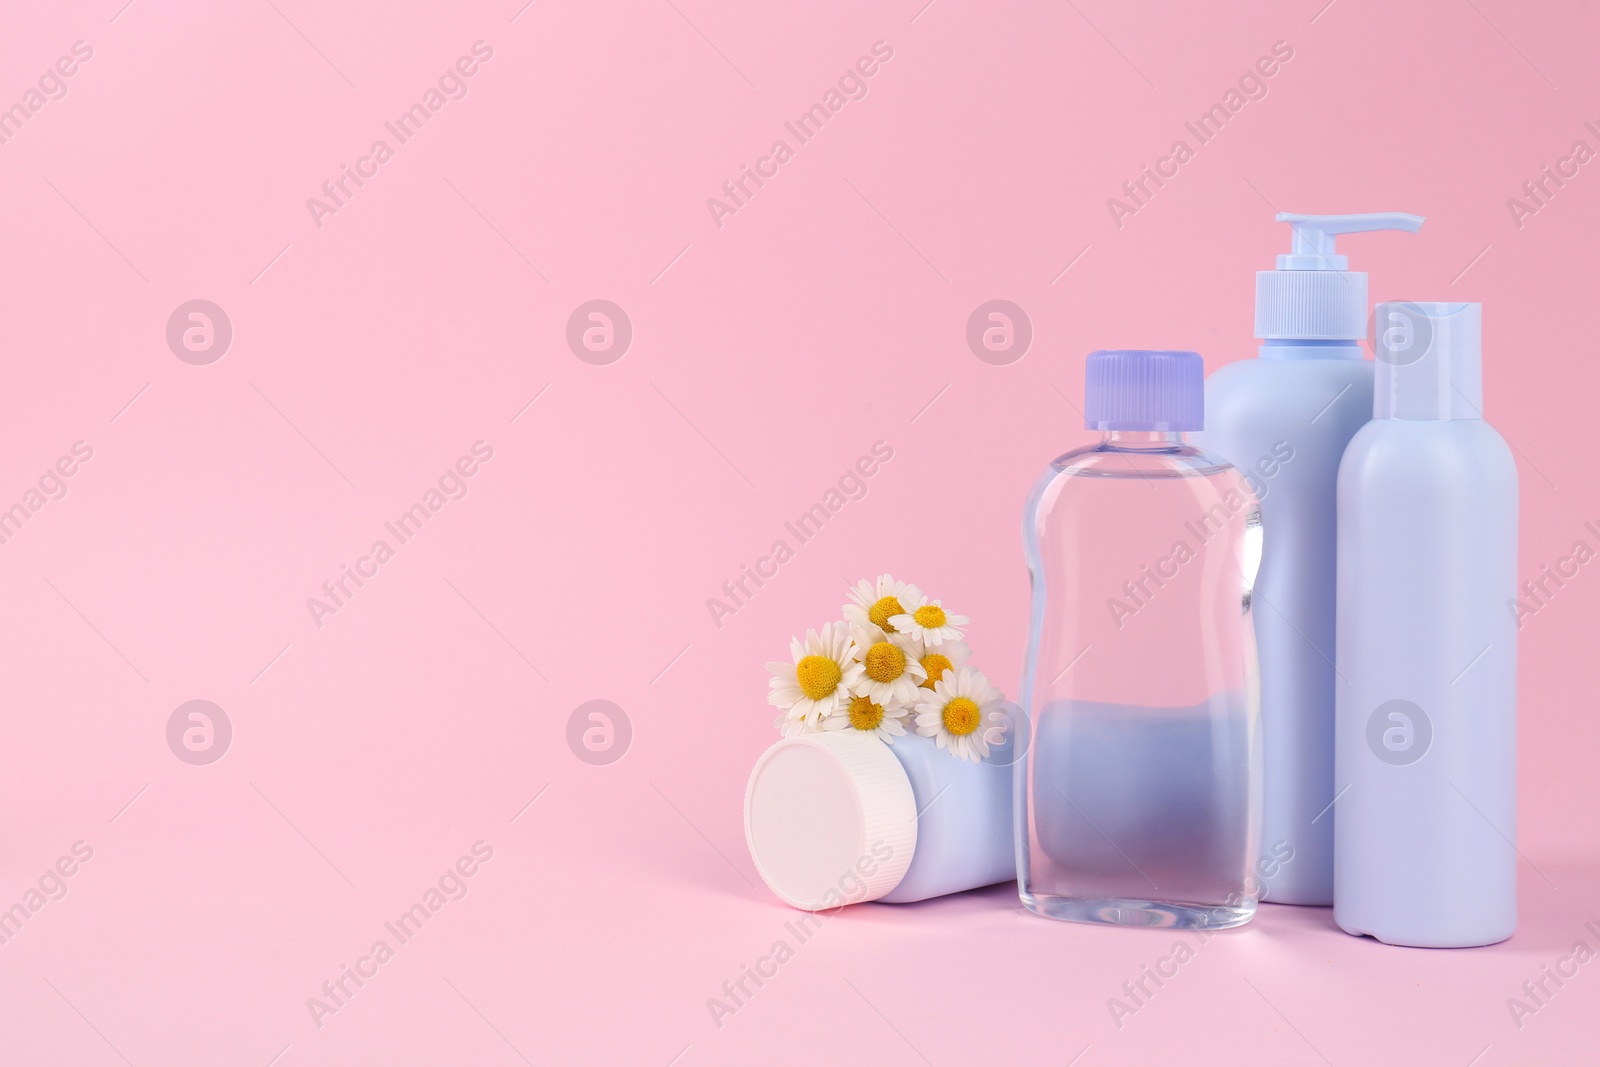 Photo of Different baby care products and chamomile flowers on pink background, space for text